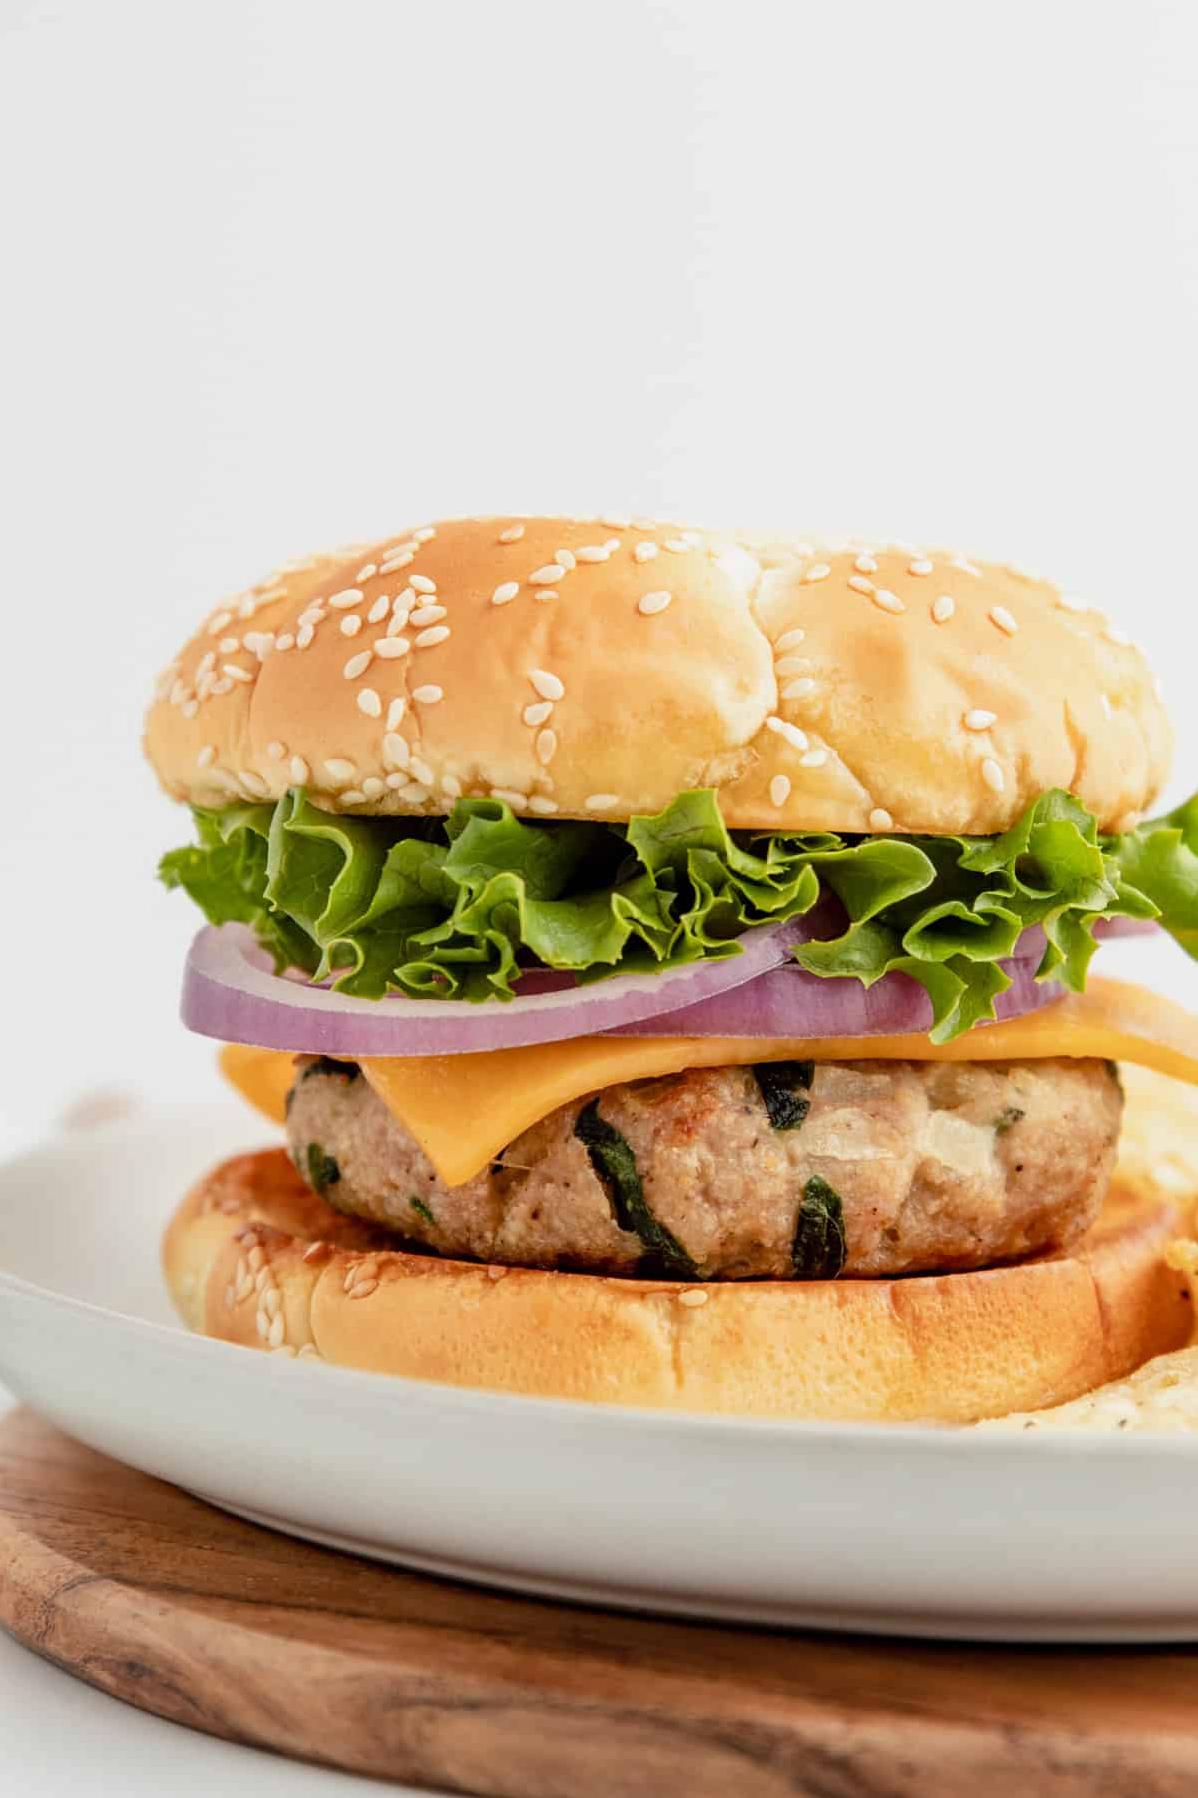  Get ready for a party in your mouth with every bite of this satisfying burger.